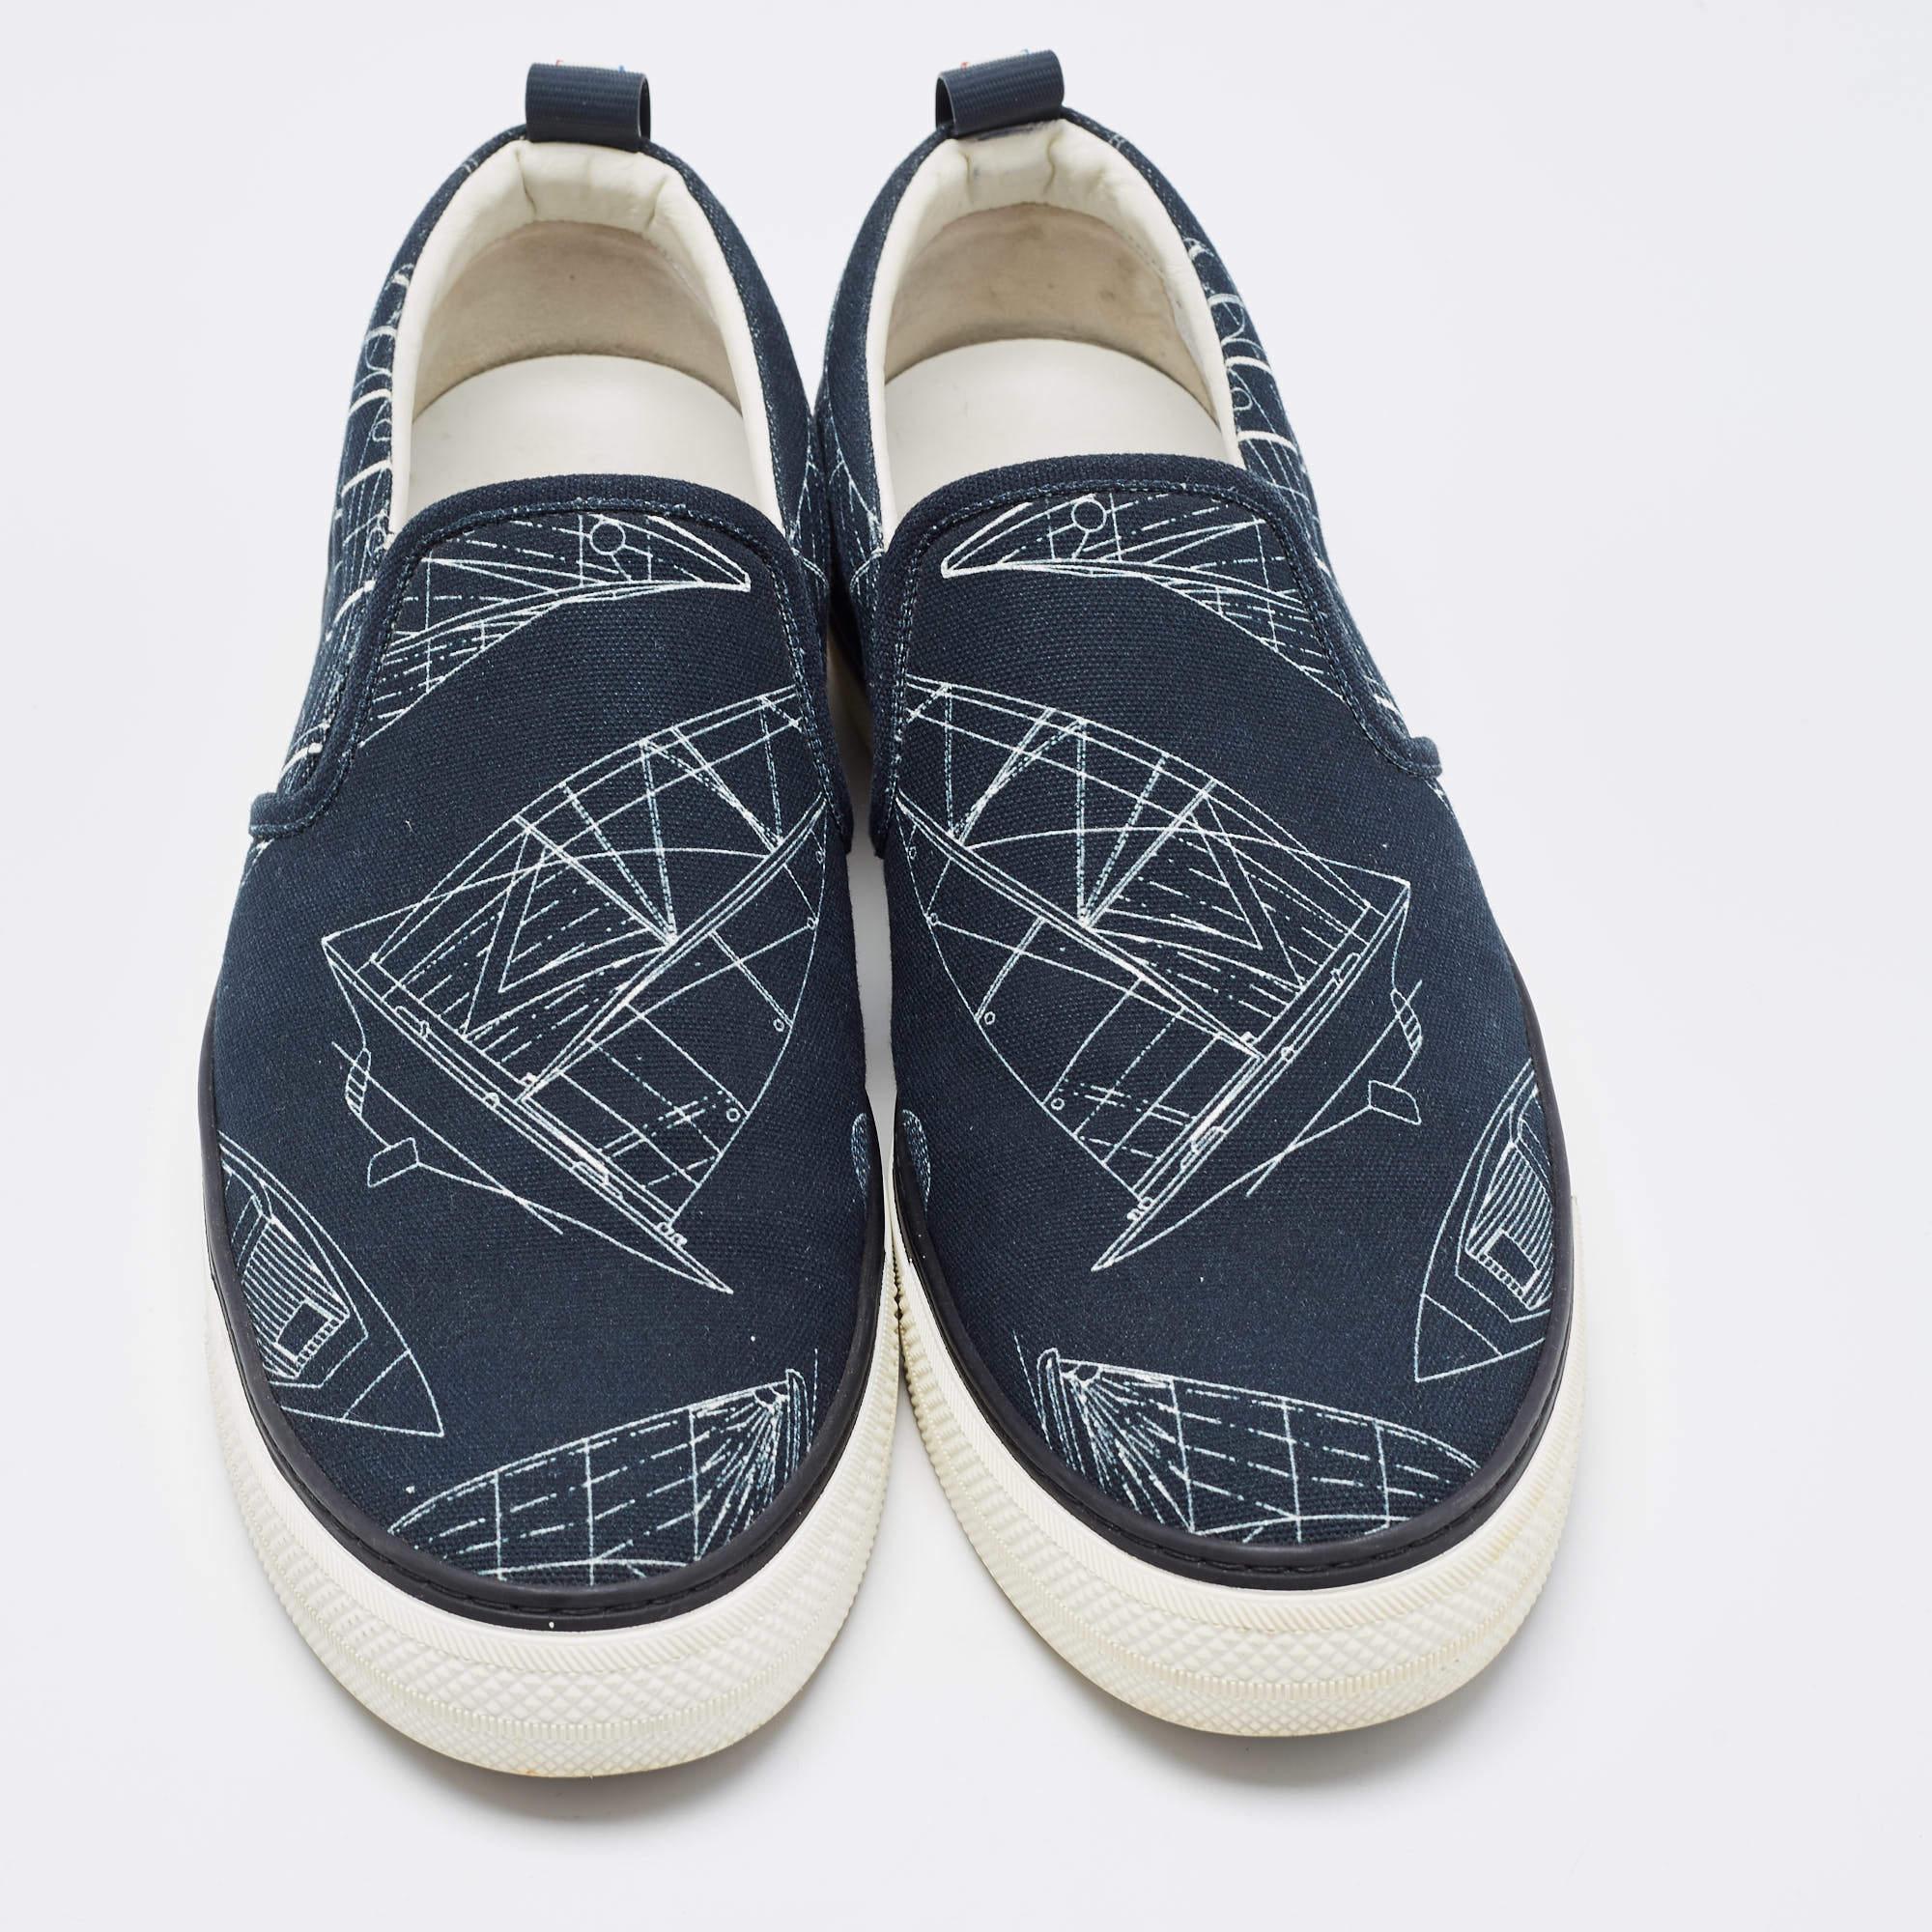 Men's Louis Vuitton Navy Blue Canvas Victory Boats Slip On Sneakers Size 43.5